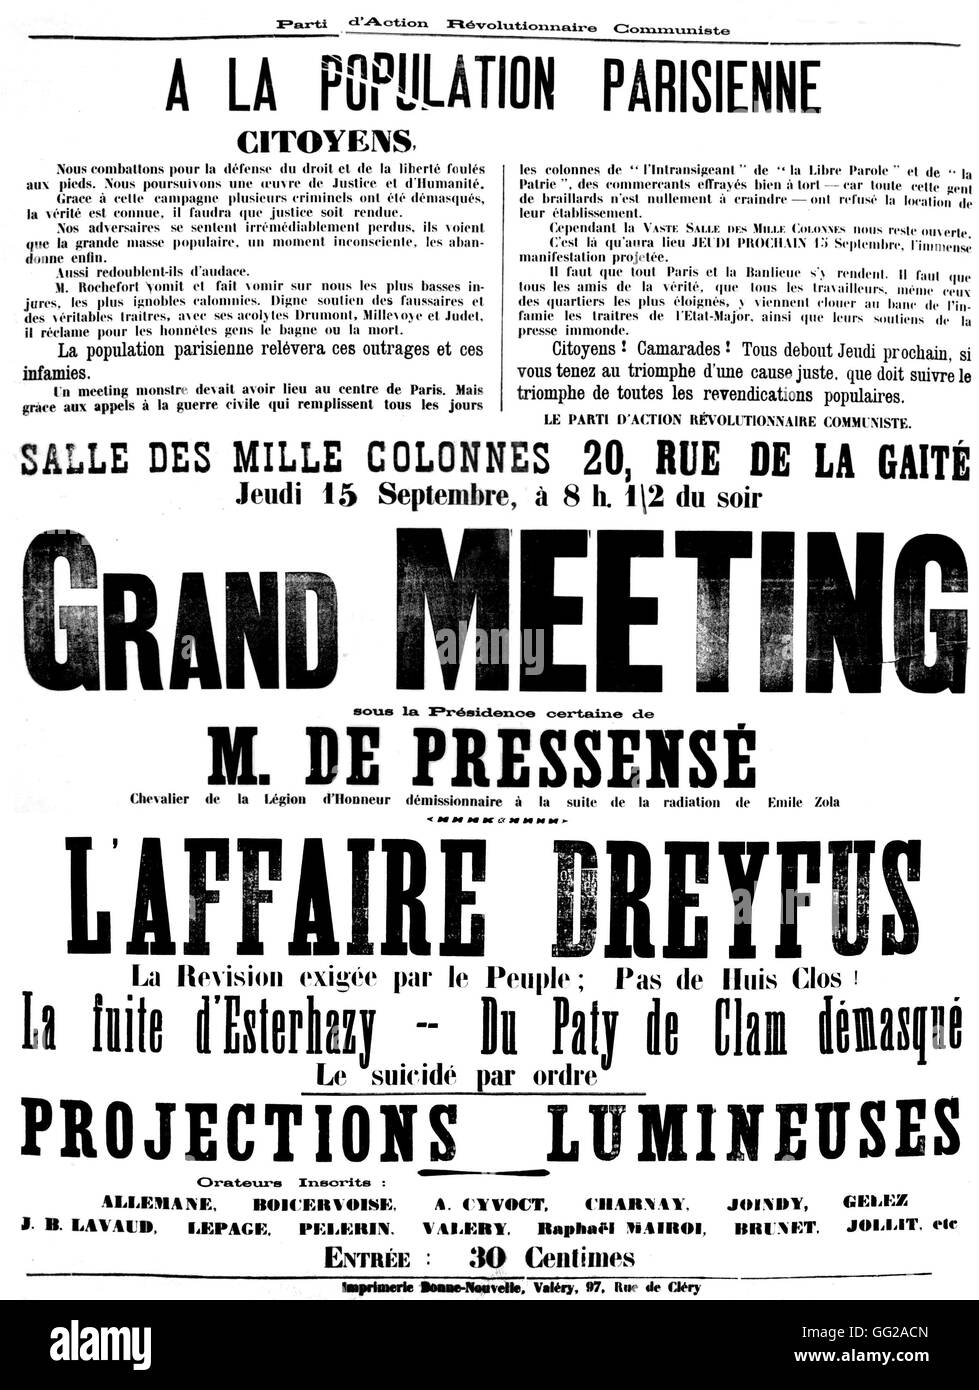 Pro-dreyfusard poster calling for a meeting  19th century France - Dreyfus Affair Paris historical library Stock Photo